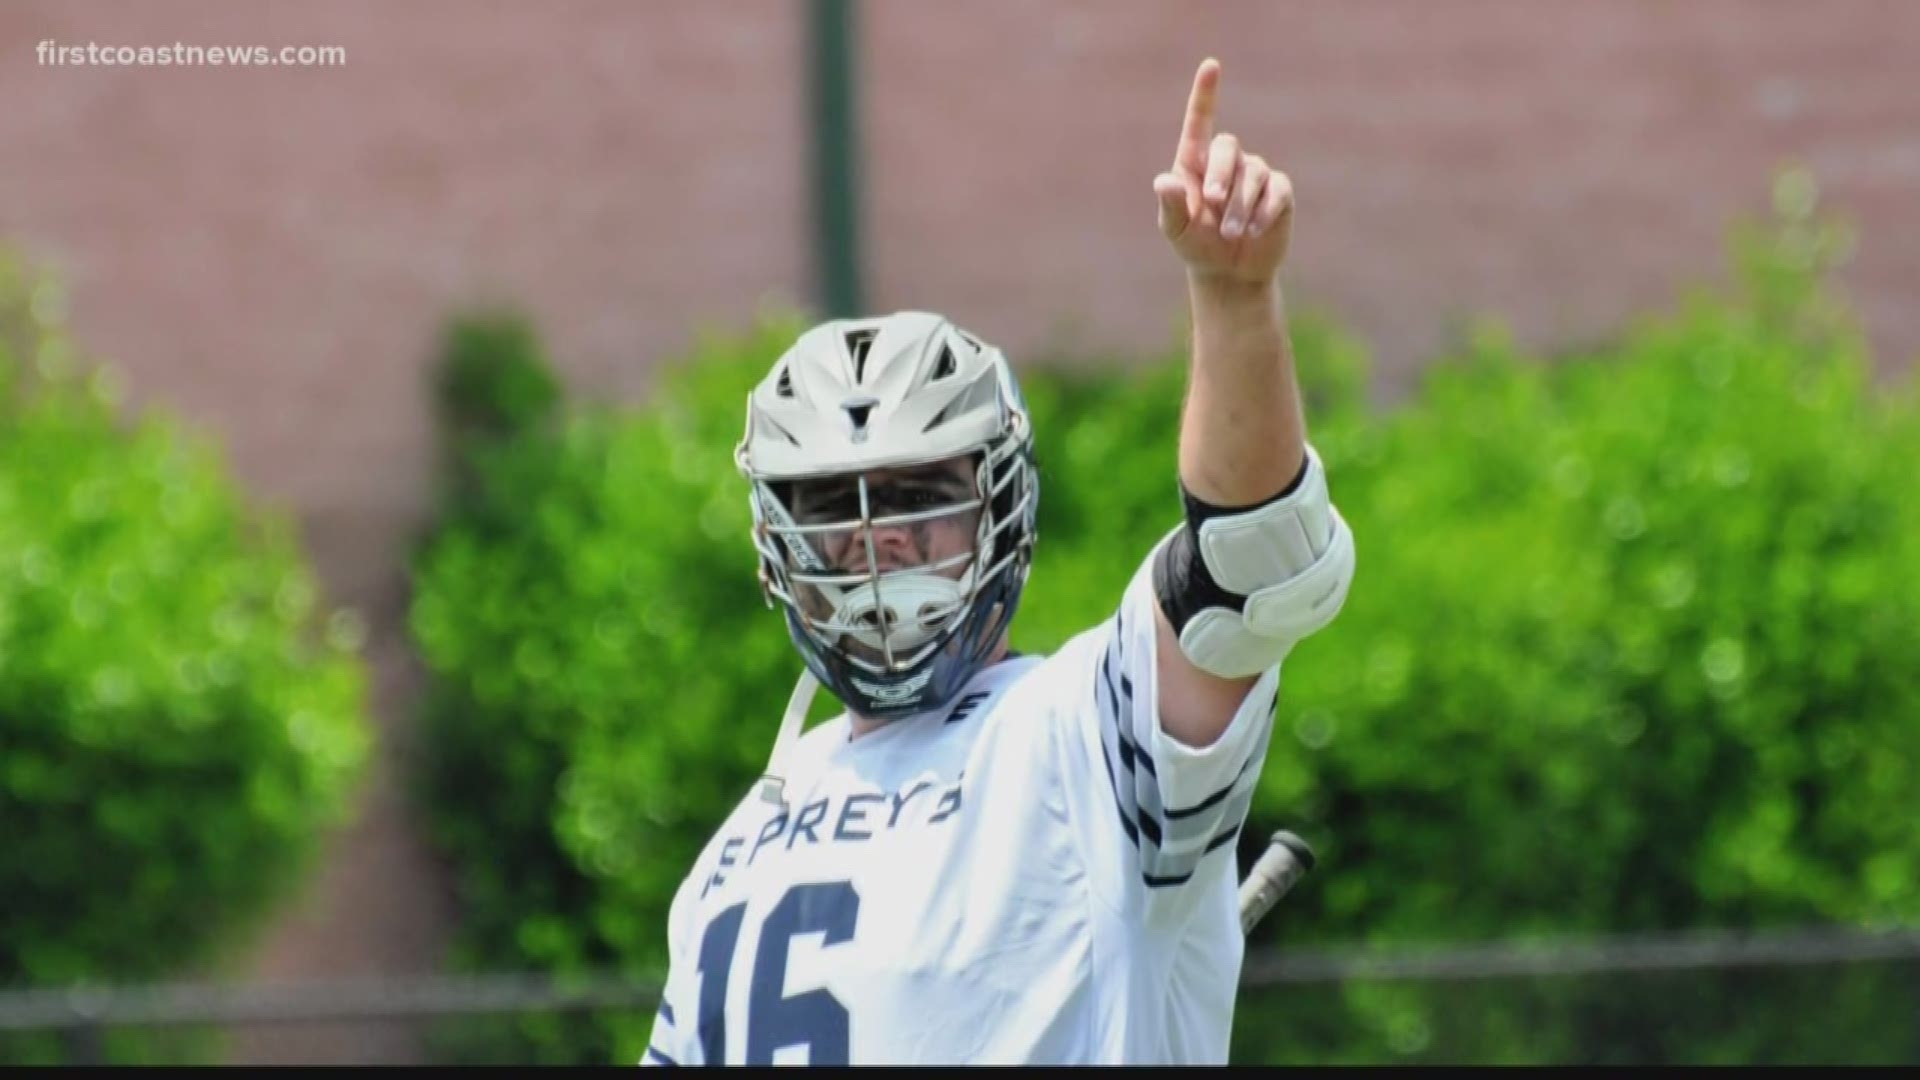 Four years ago, the UNF Lacrosse team was largely a pick-up team. Now, they're playing in the first MCLA National Tournament in program history.